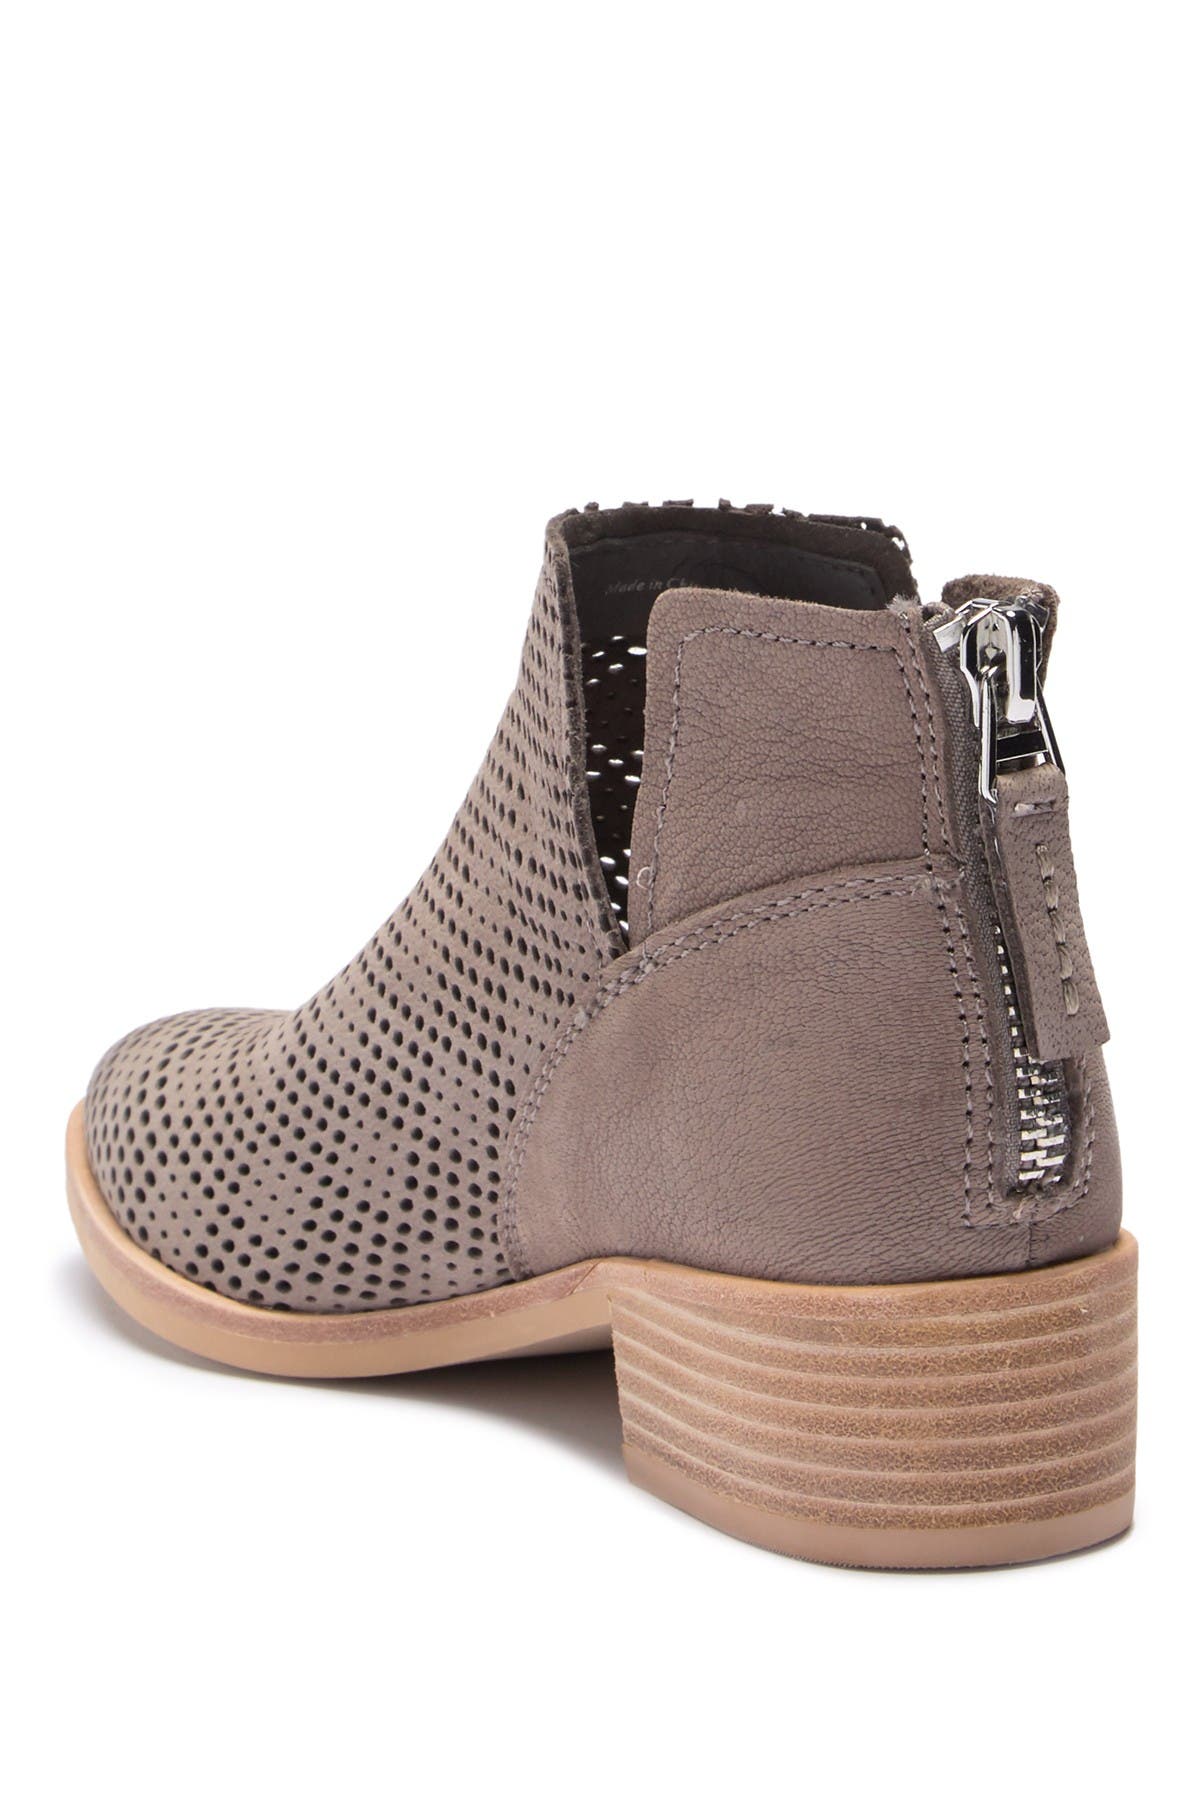 tommi perforated bootie dolce vita